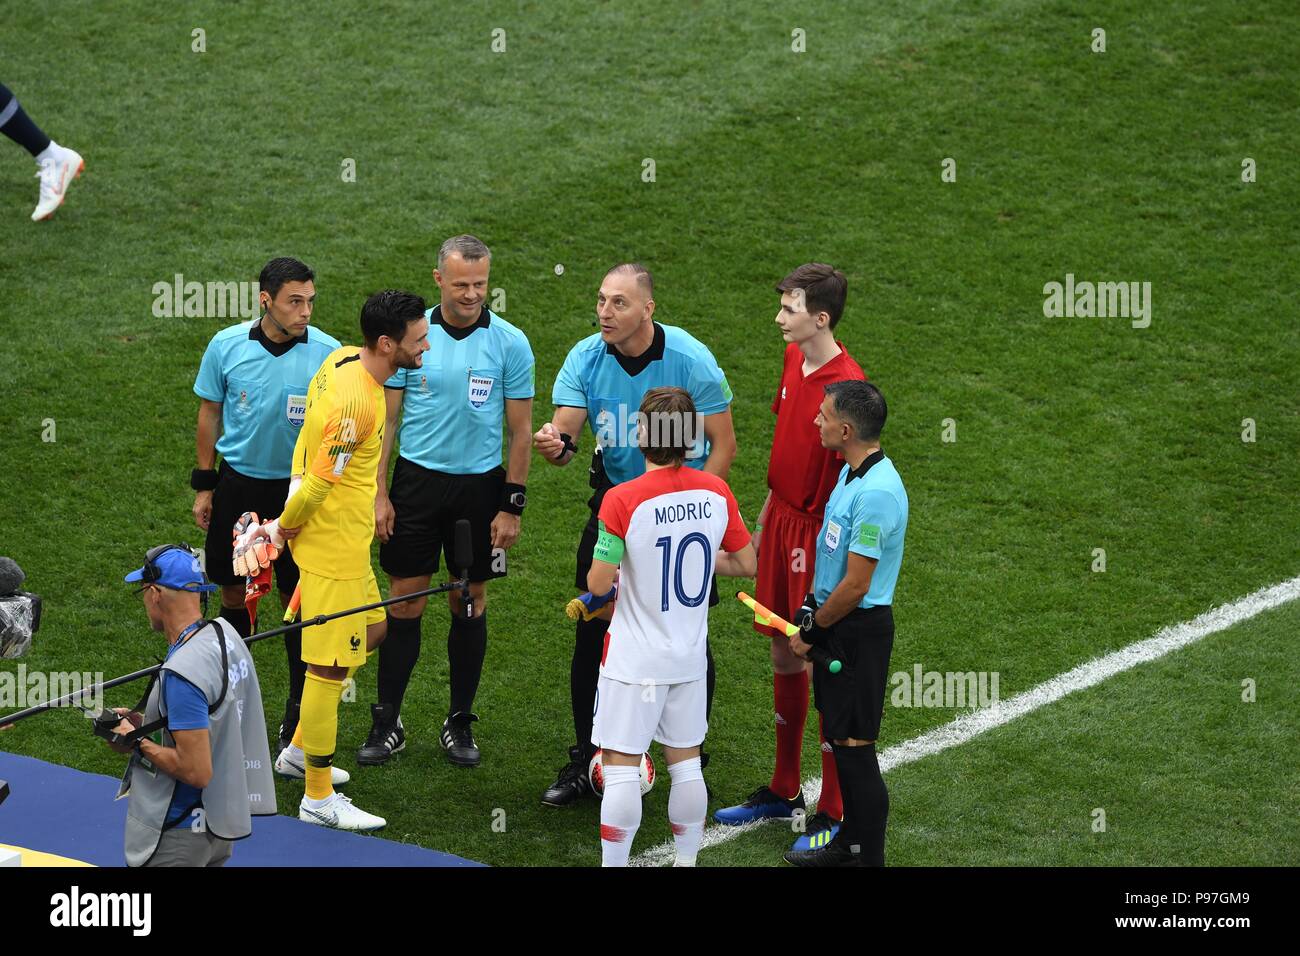 Moscow, Russia. July 15th, 2018, Referee Nestor Pitana of Argentina tossing coins between captain of France and Croatia during the final match between France and Croatia at Luzhniki  stadium, Moscow. Shoja Lak/Alamy Live News. Stock Photo